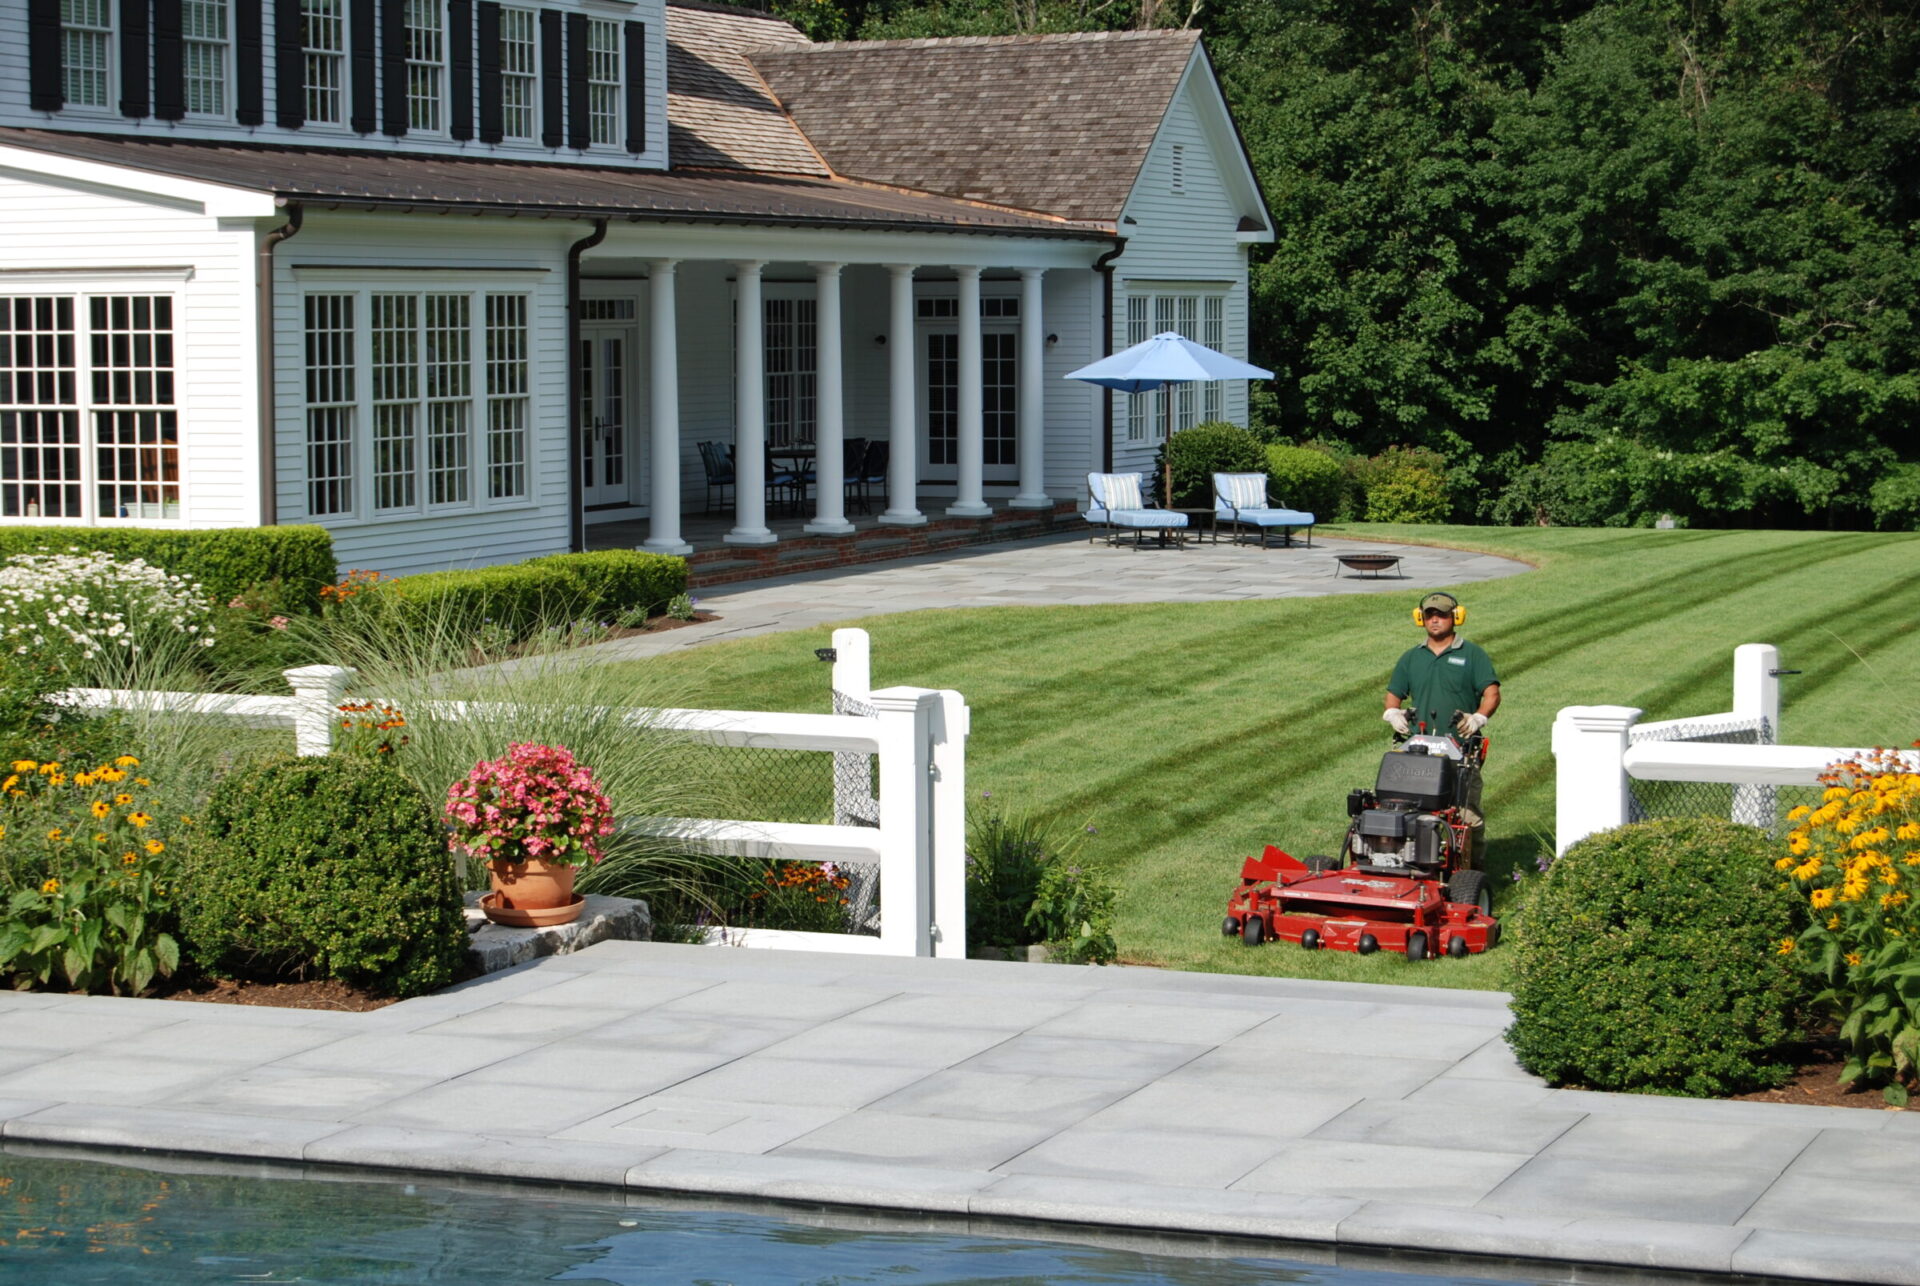 A person is mowing a lawn near a luxurious house with a pool. There are landscaped flowers, white fencing, and lounging chairs in the background.